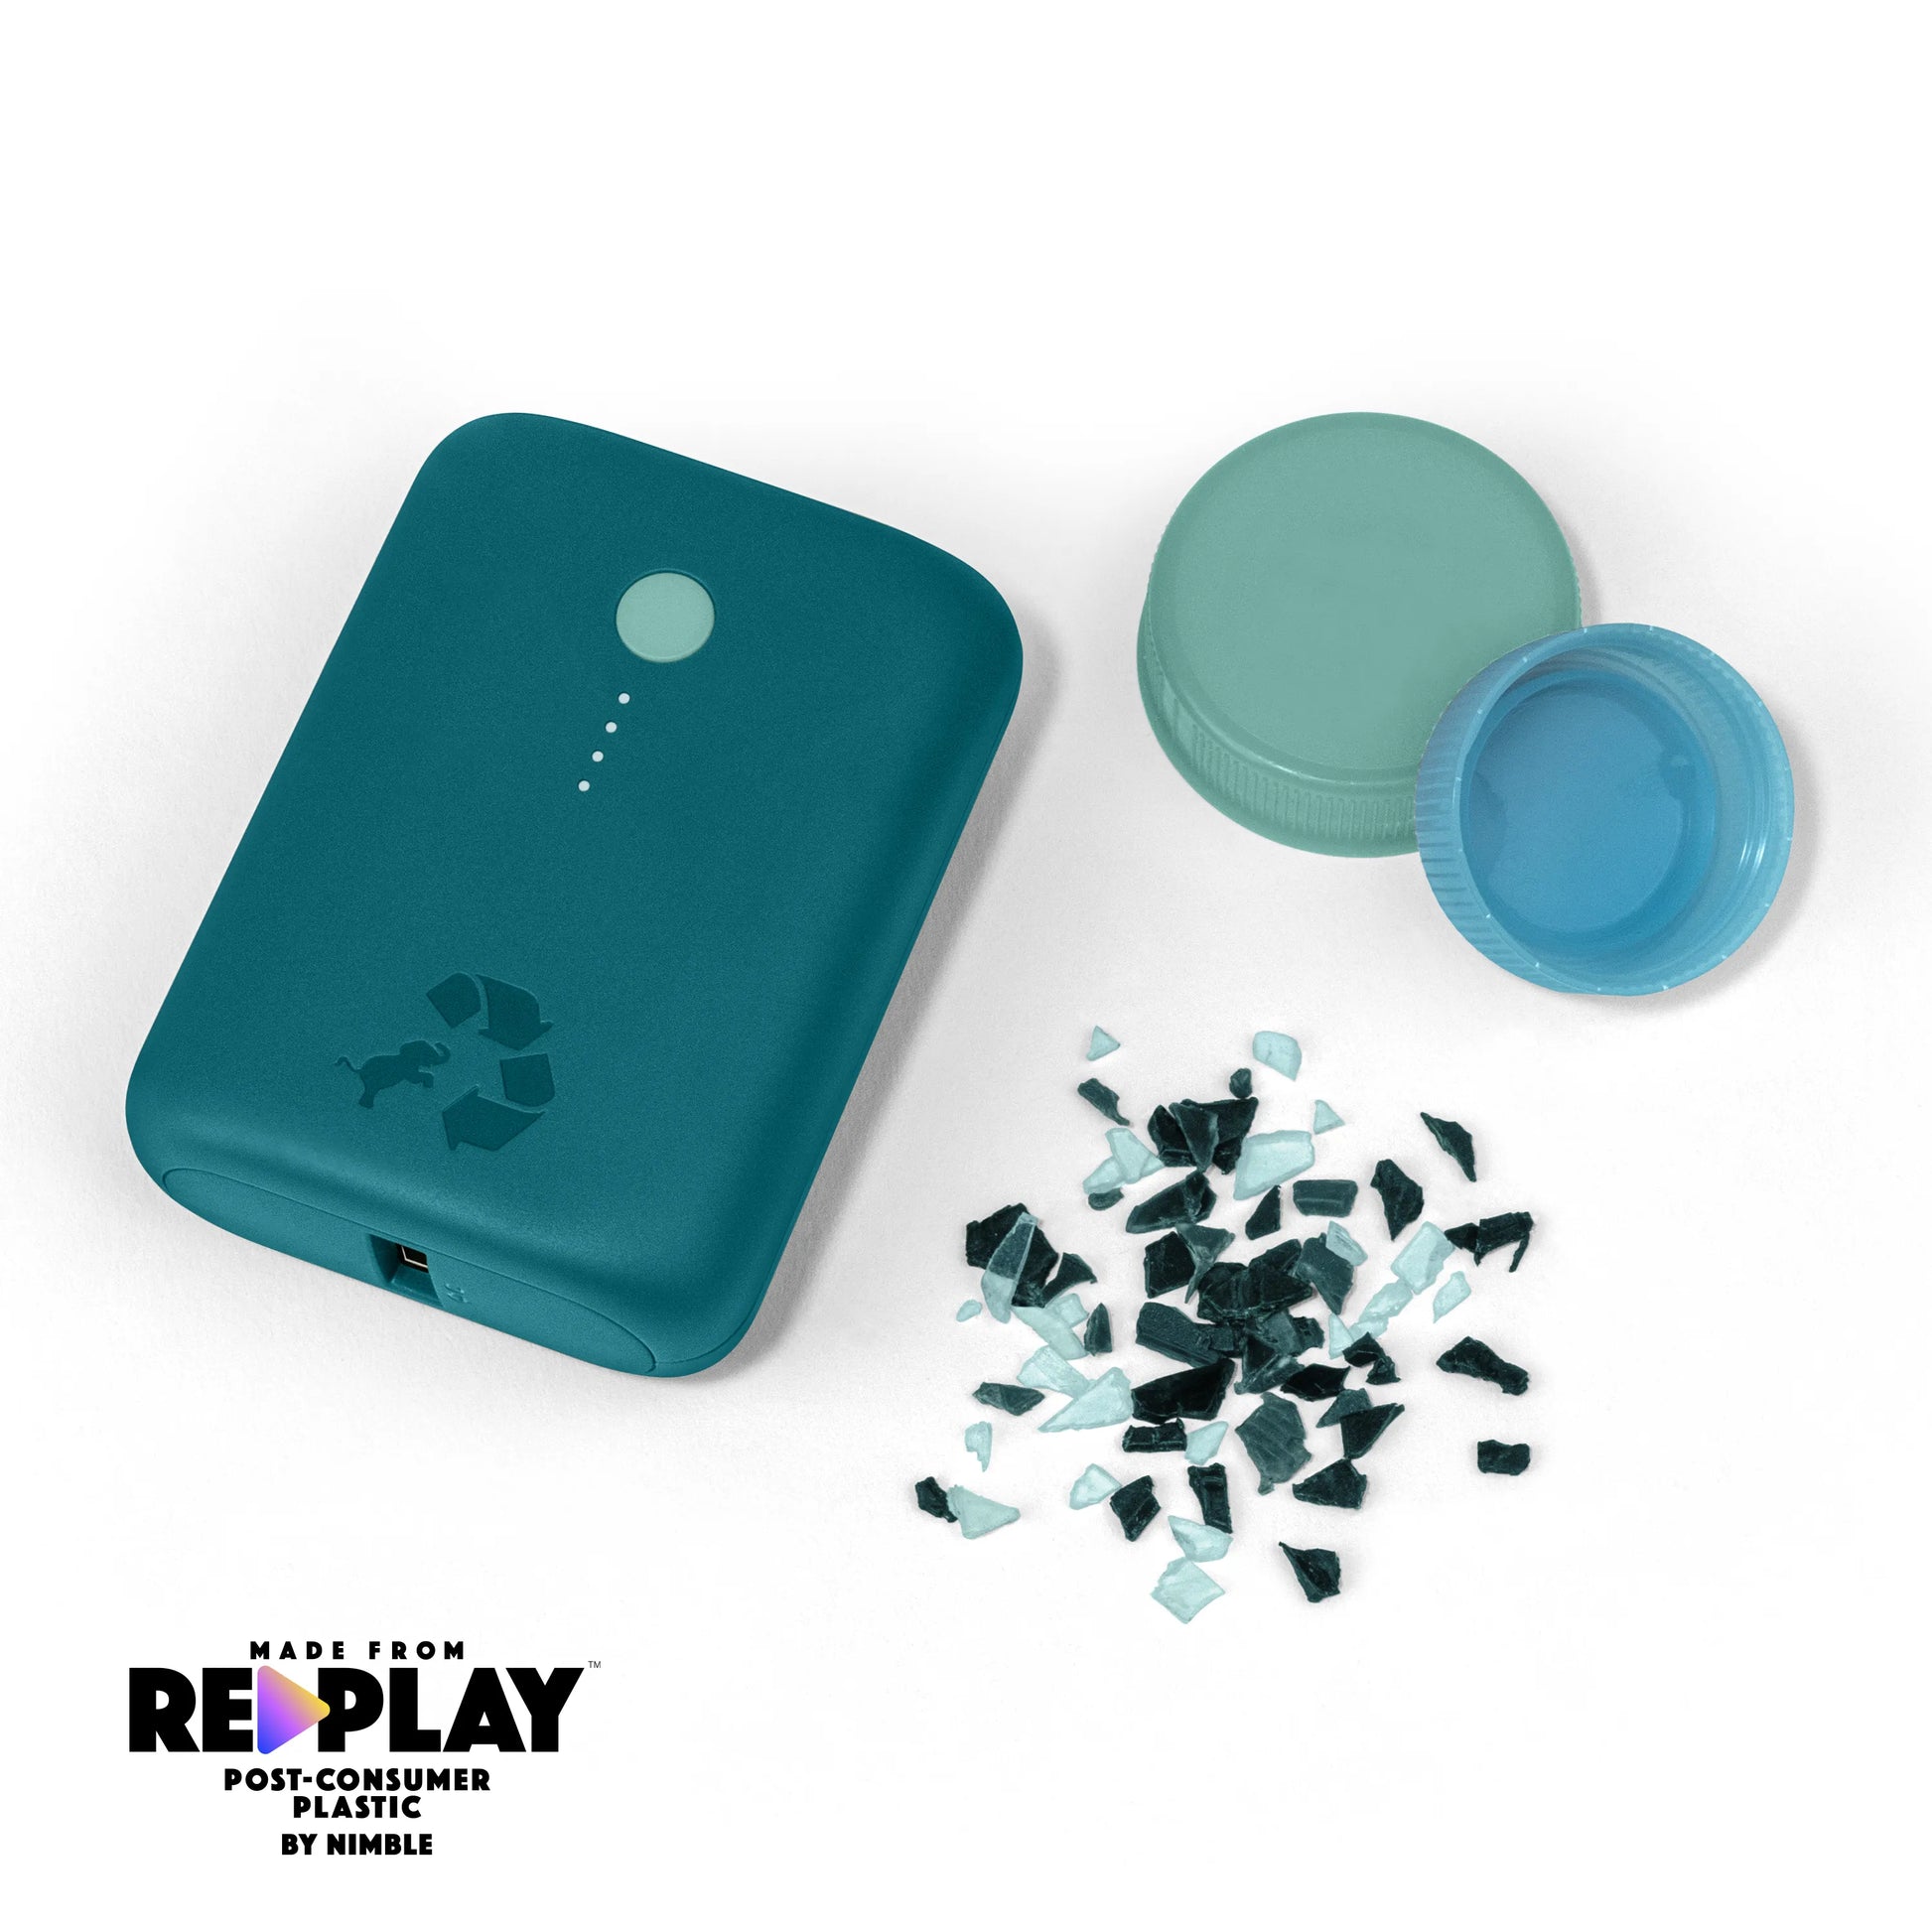 Turquoise portable charger with green button next to bottle caps and shredded plastic.